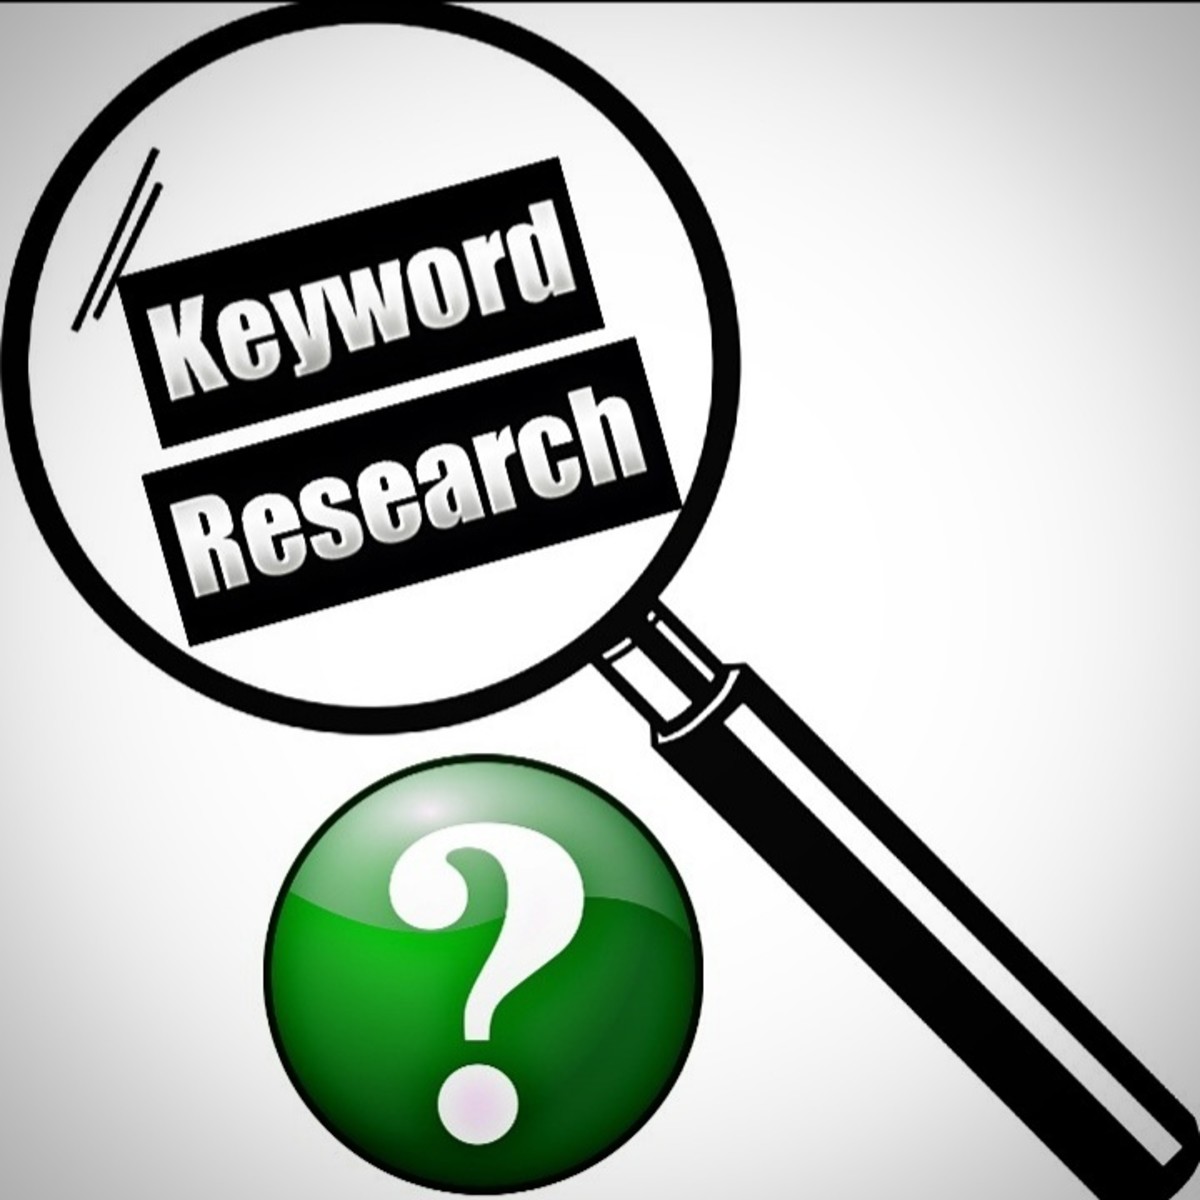 How to Do Keyword Research, Beginner’s Guide